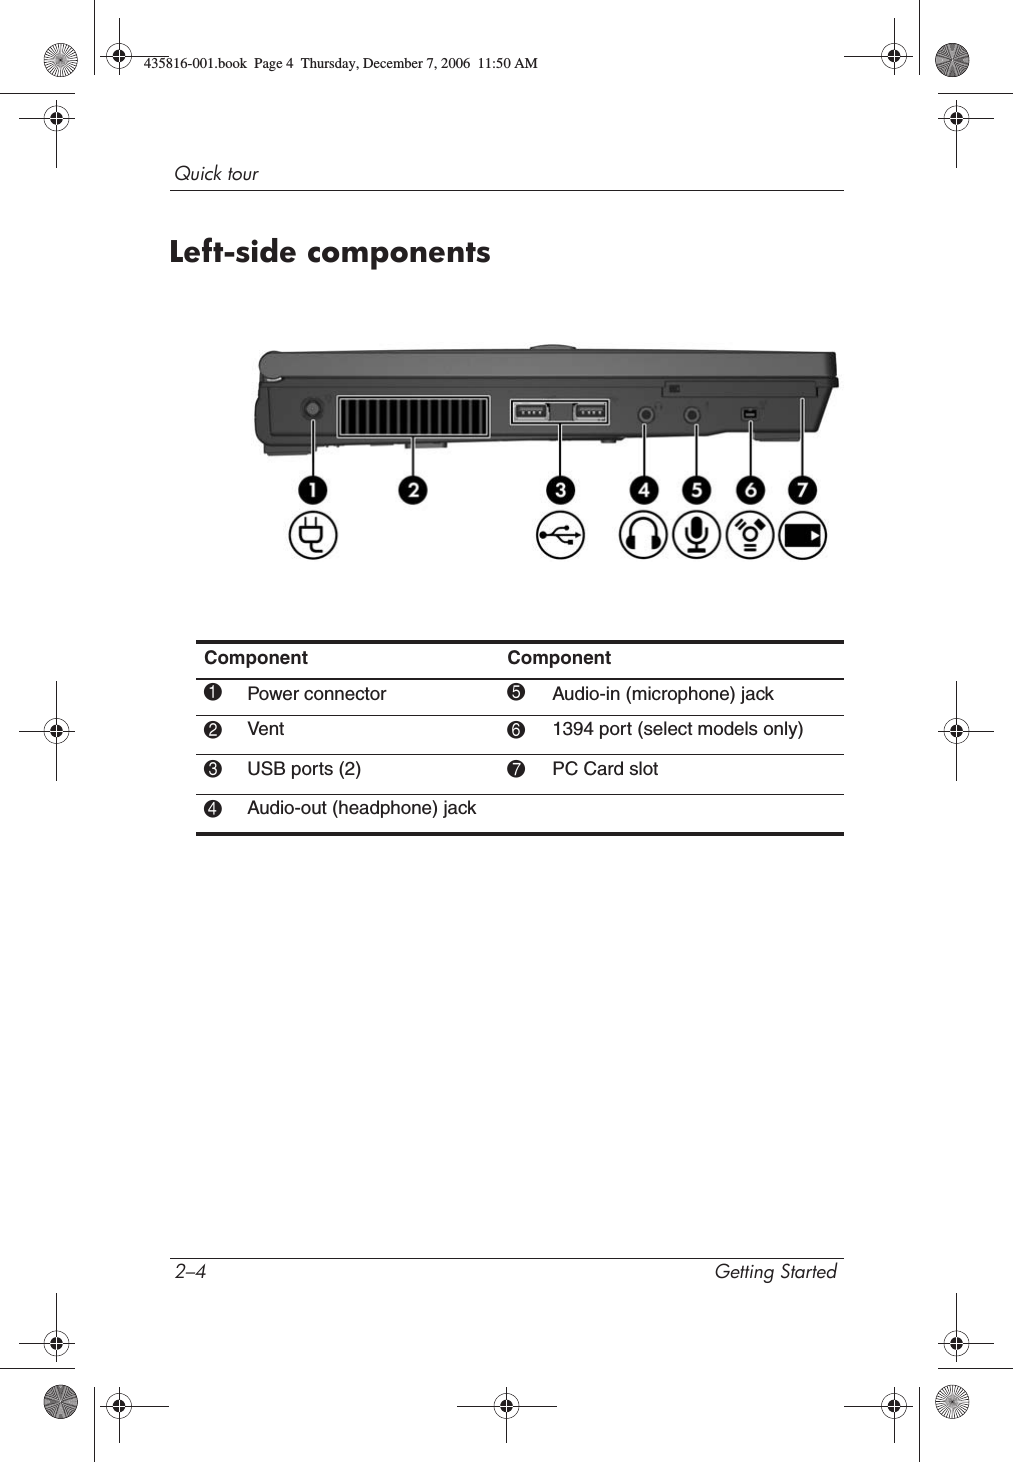 2–4 Getting StartedQuick tourLeft-side componentsComponent Component1Power connector 5Audio-in (microphone) jack2Vent 61394 port (select models only)3USB ports (2)  7PC Card slot4Audio-out (headphone) jack435816-001.book  Page 4  Thursday, December 7, 2006  11:50 AM